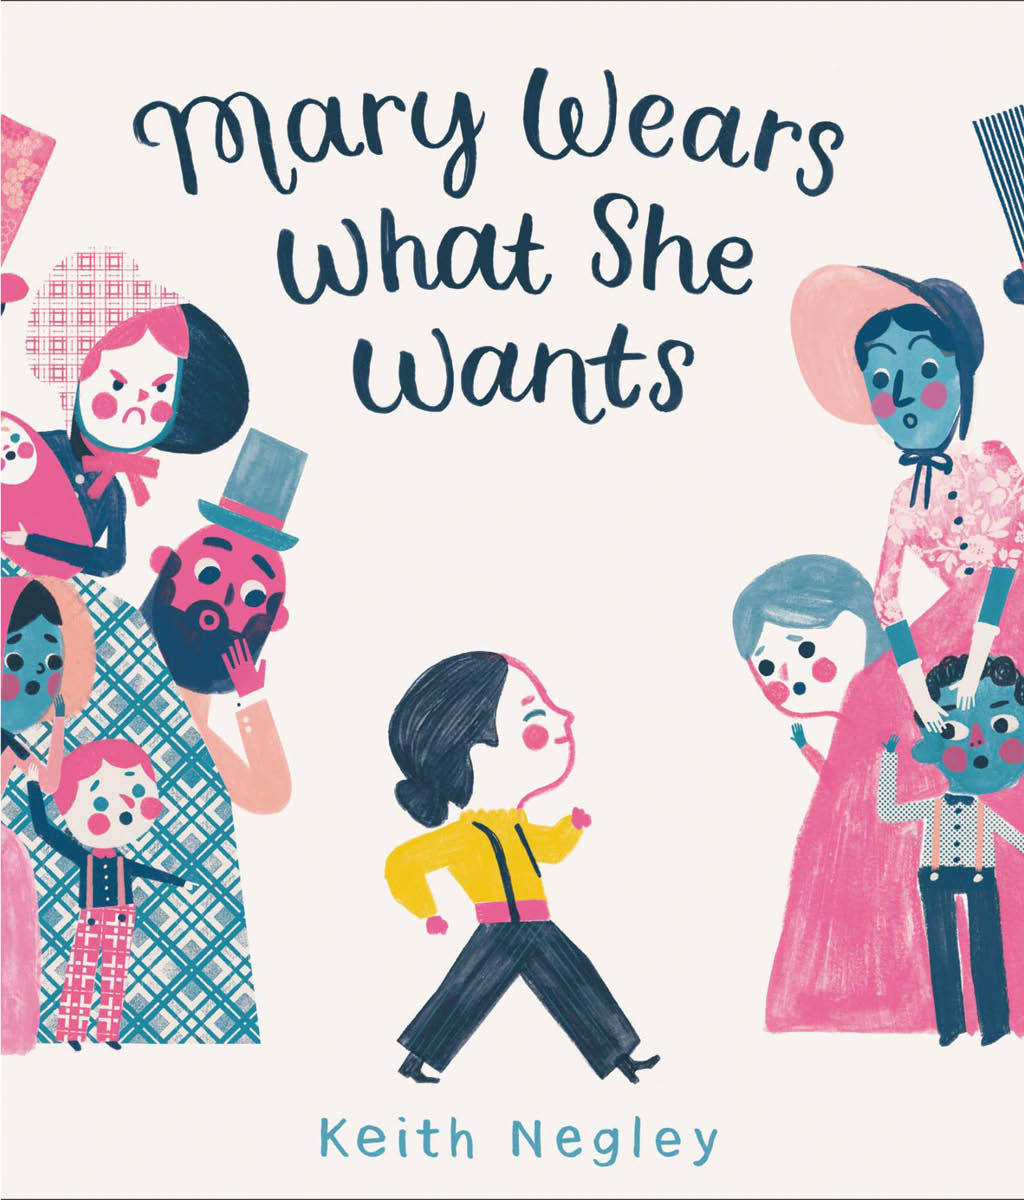 Mary Wears What She Wants by Keith Negley